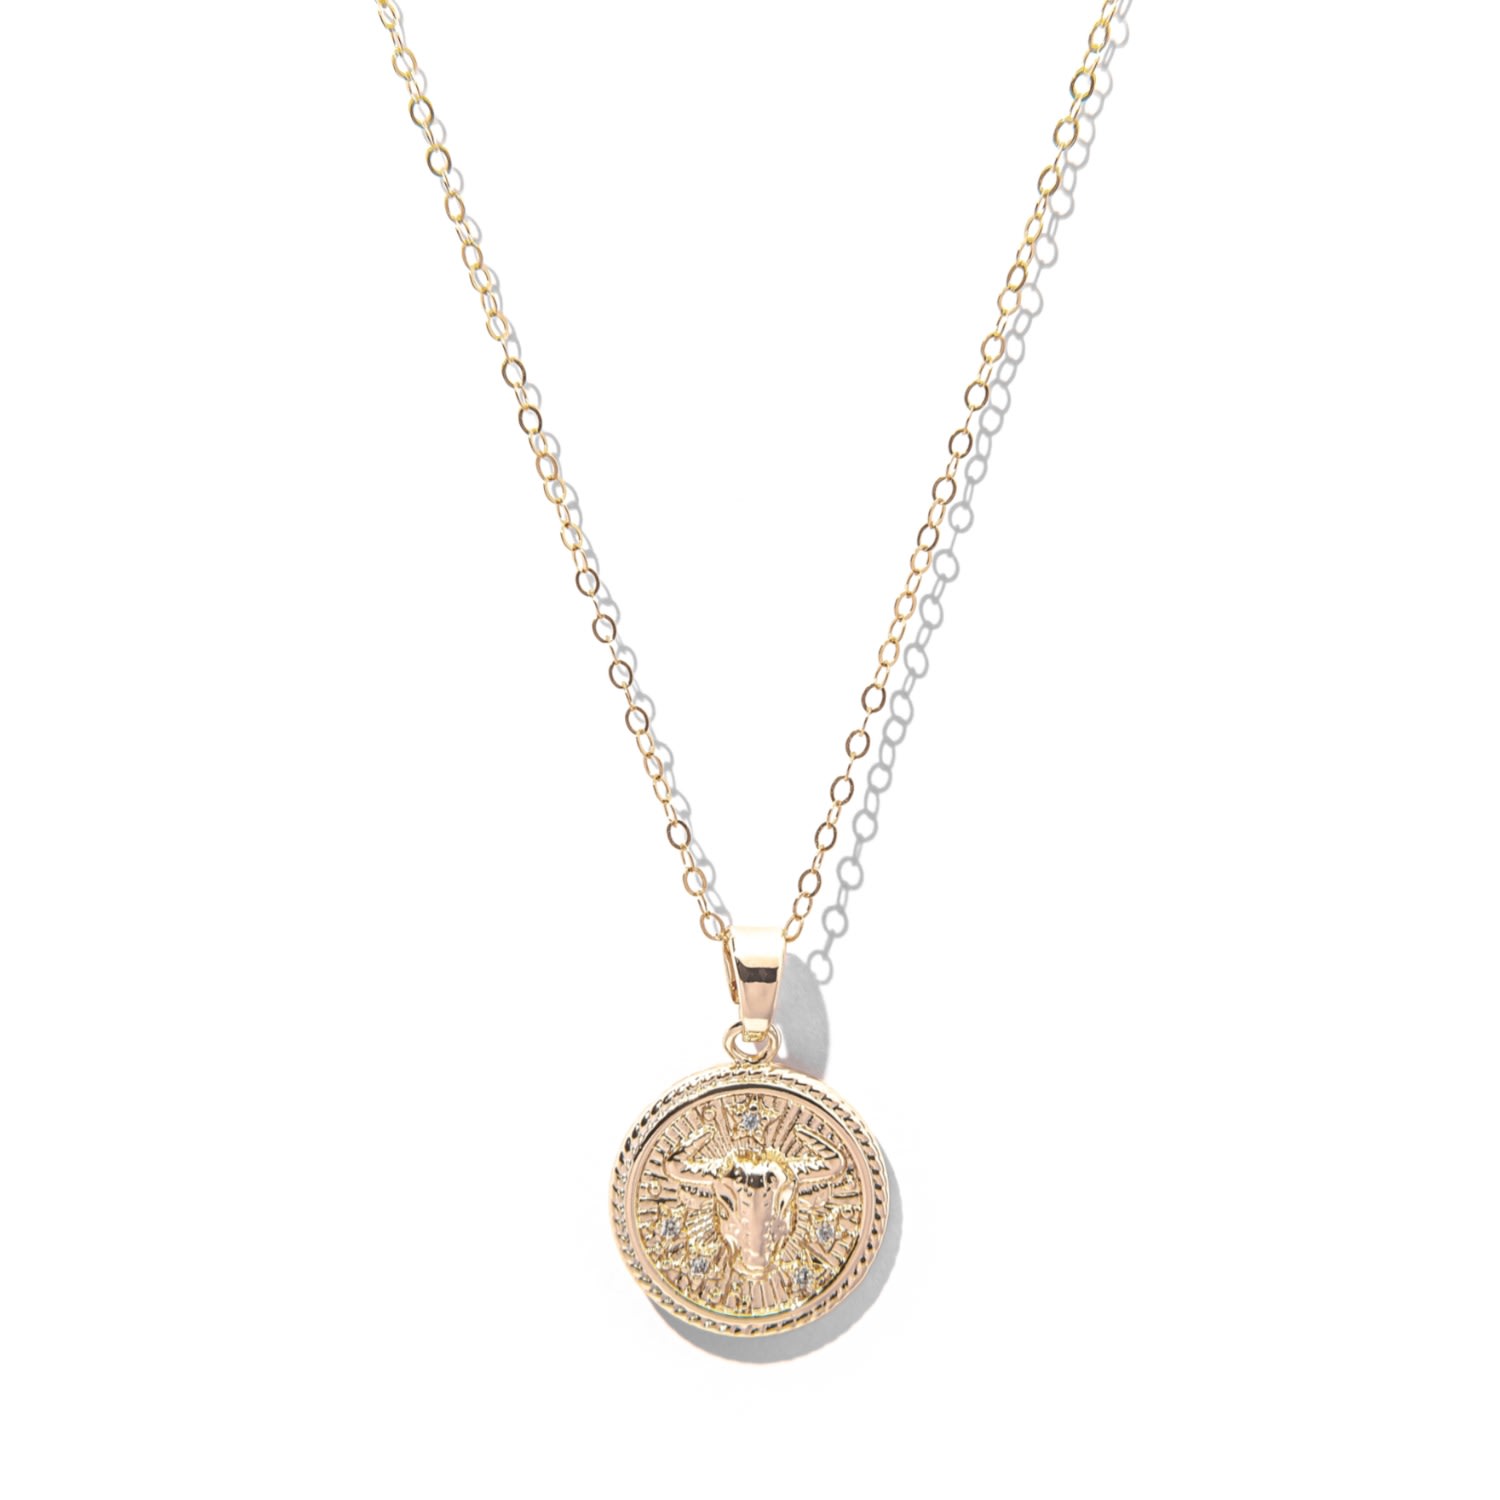 Women's Taurus Zodiac Medallion Pendant Gold Filled Necklace The Essential Jewels